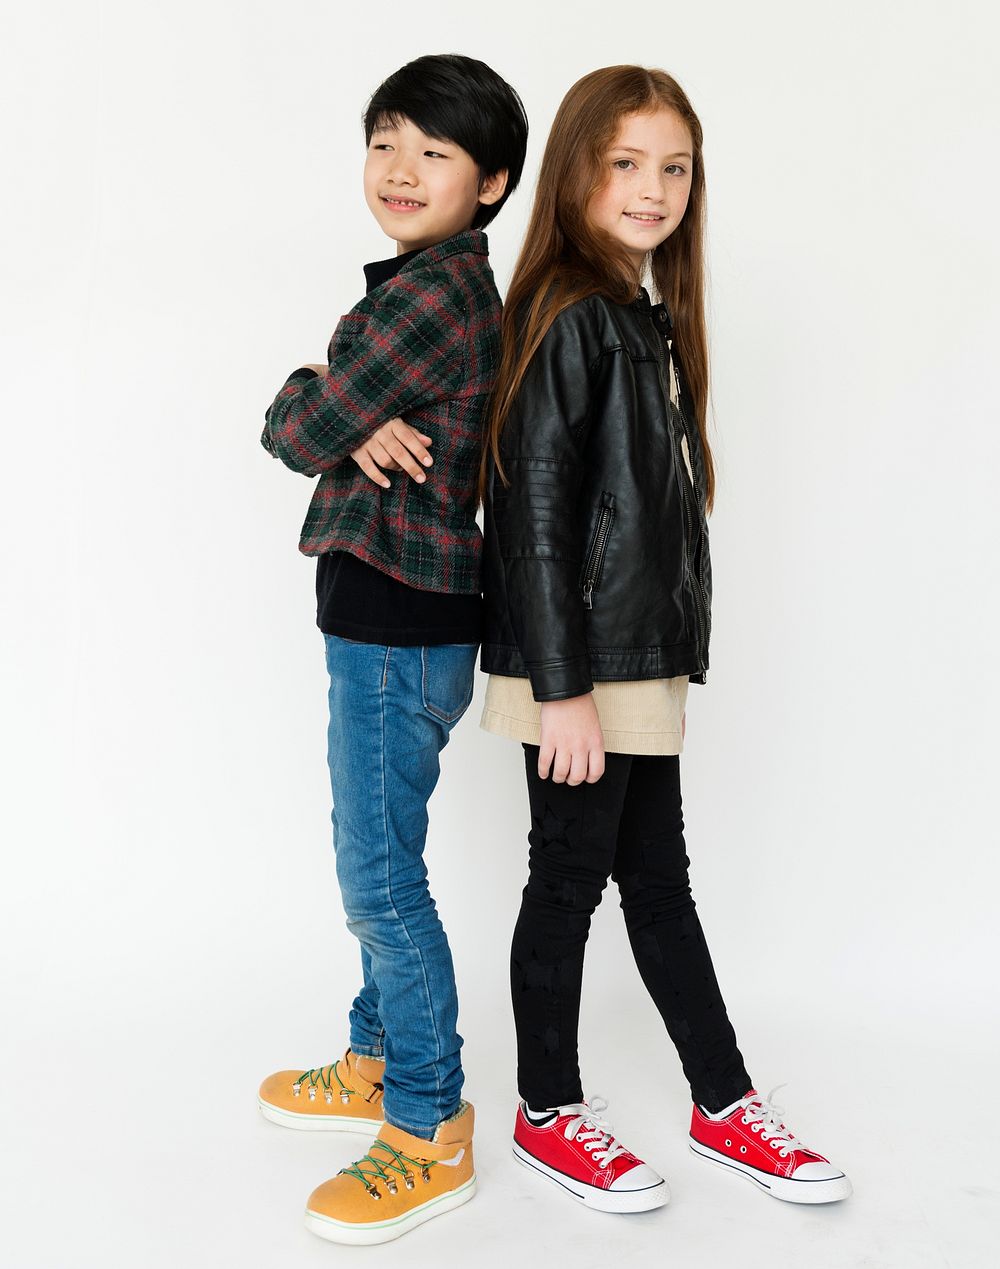 Boy and girl is in a studio shoot.